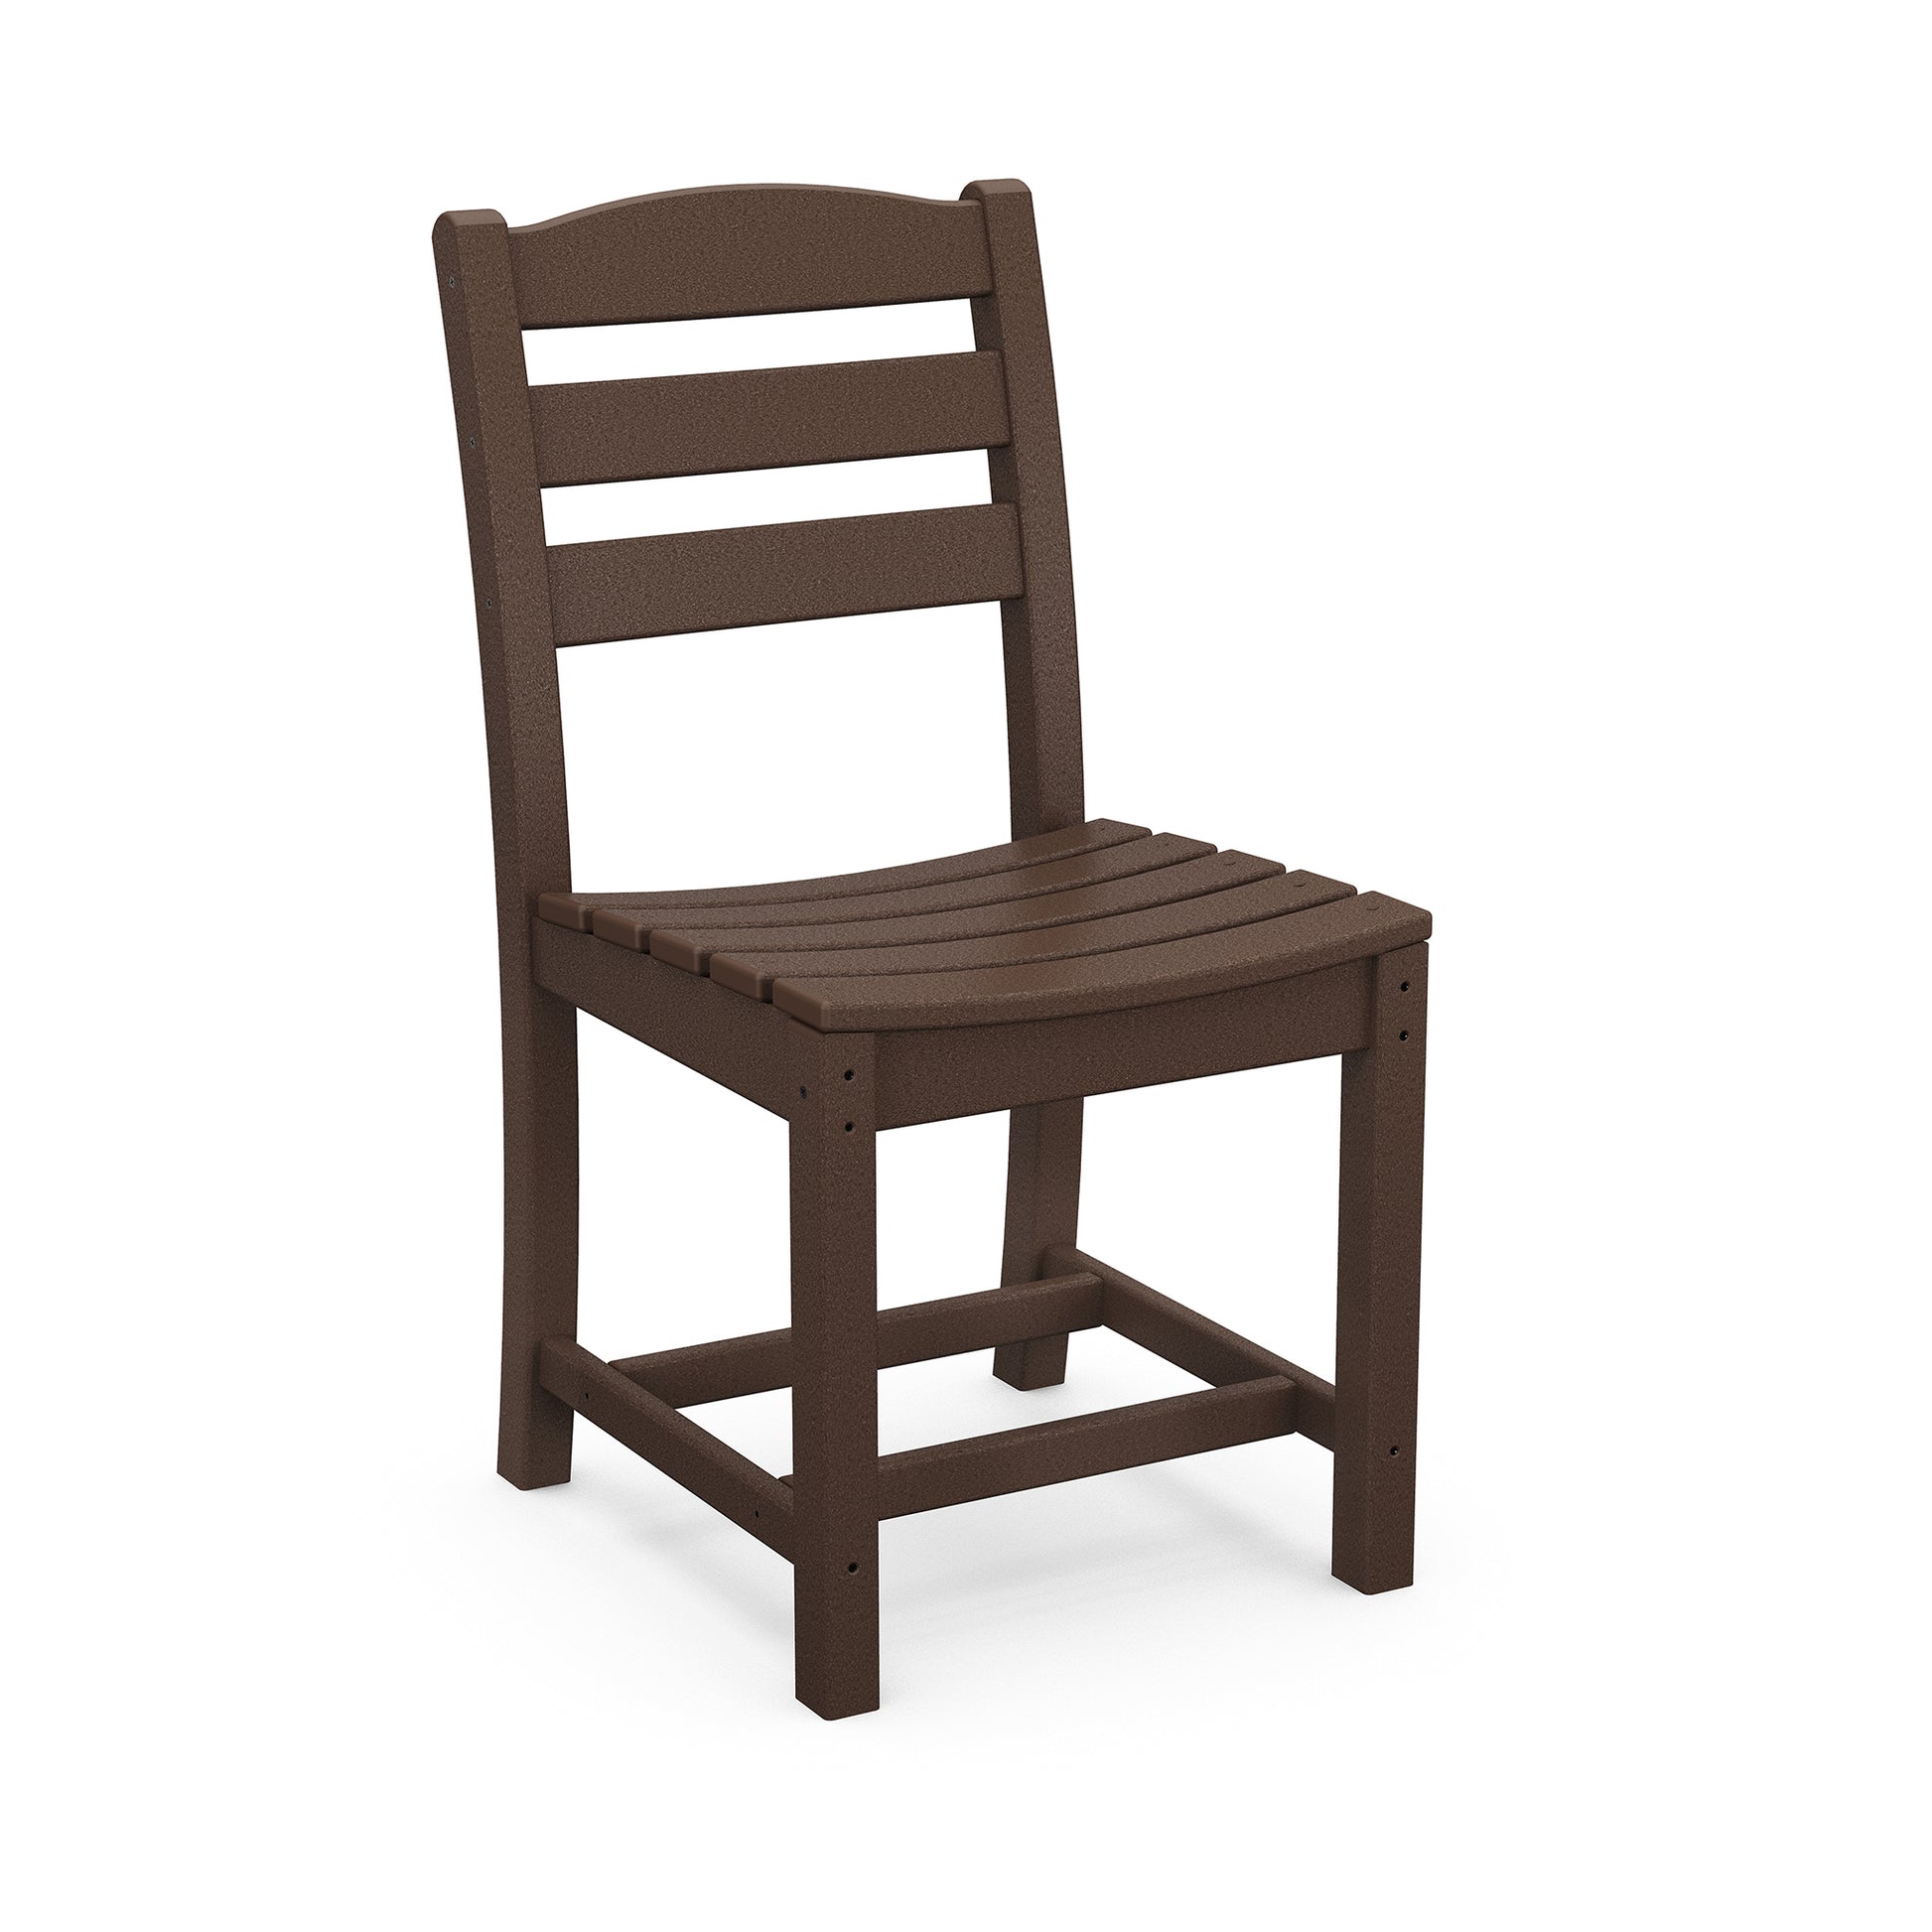 A brown POLYWOOD La Casa Cafe Outdoor Dining Side Chair with a slatted seat and backrest, viewed against a plain white background.